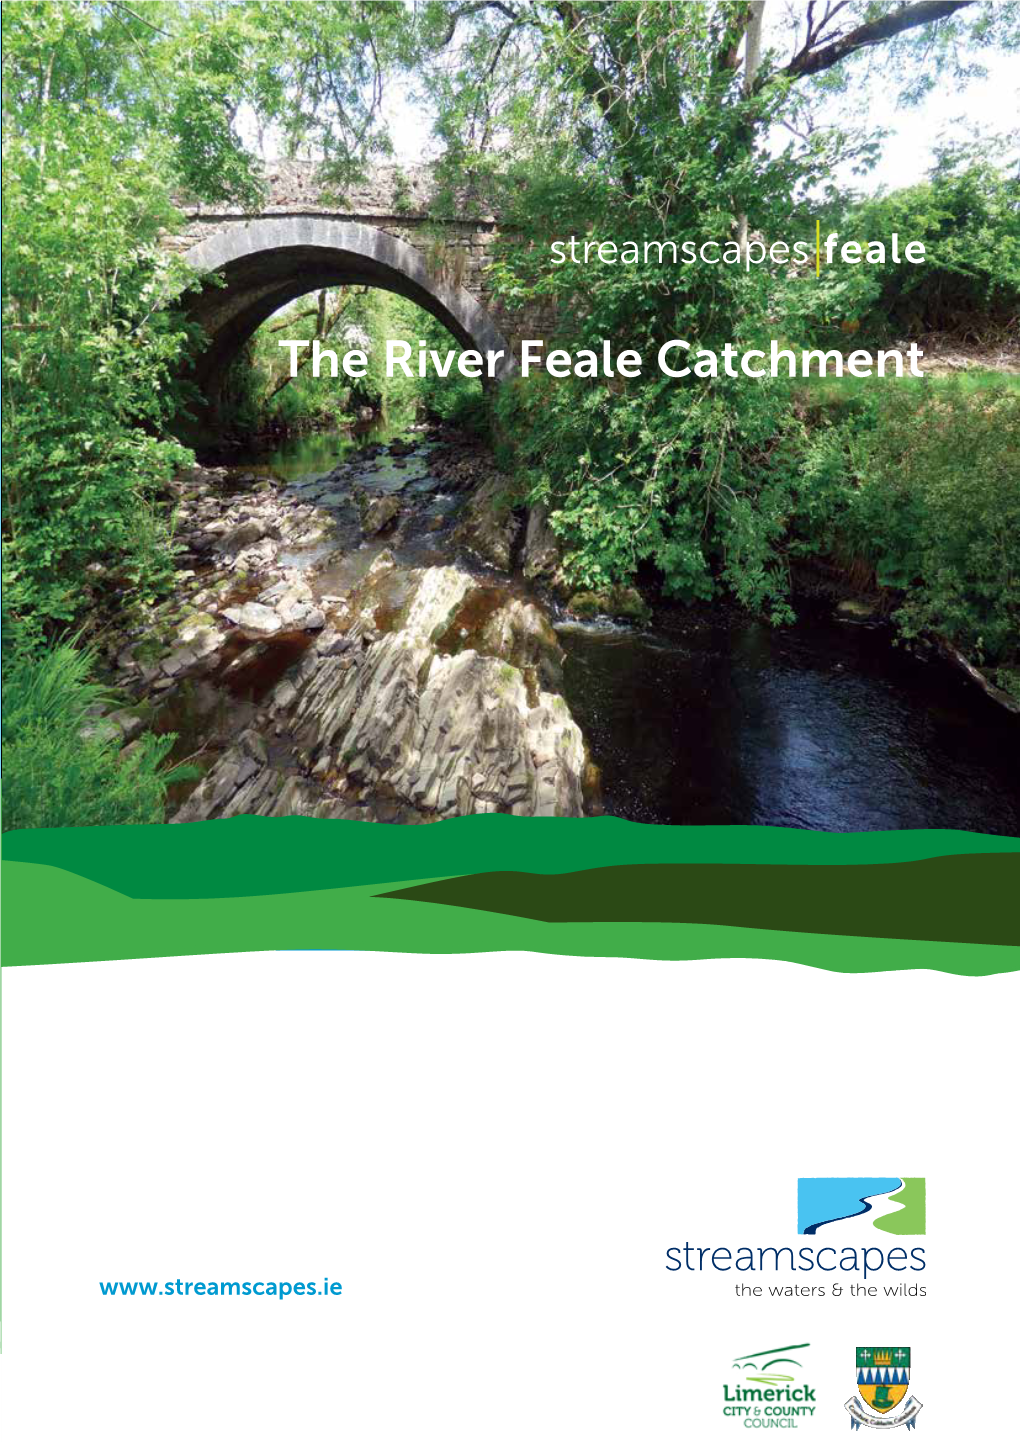 The River Feale Catchment